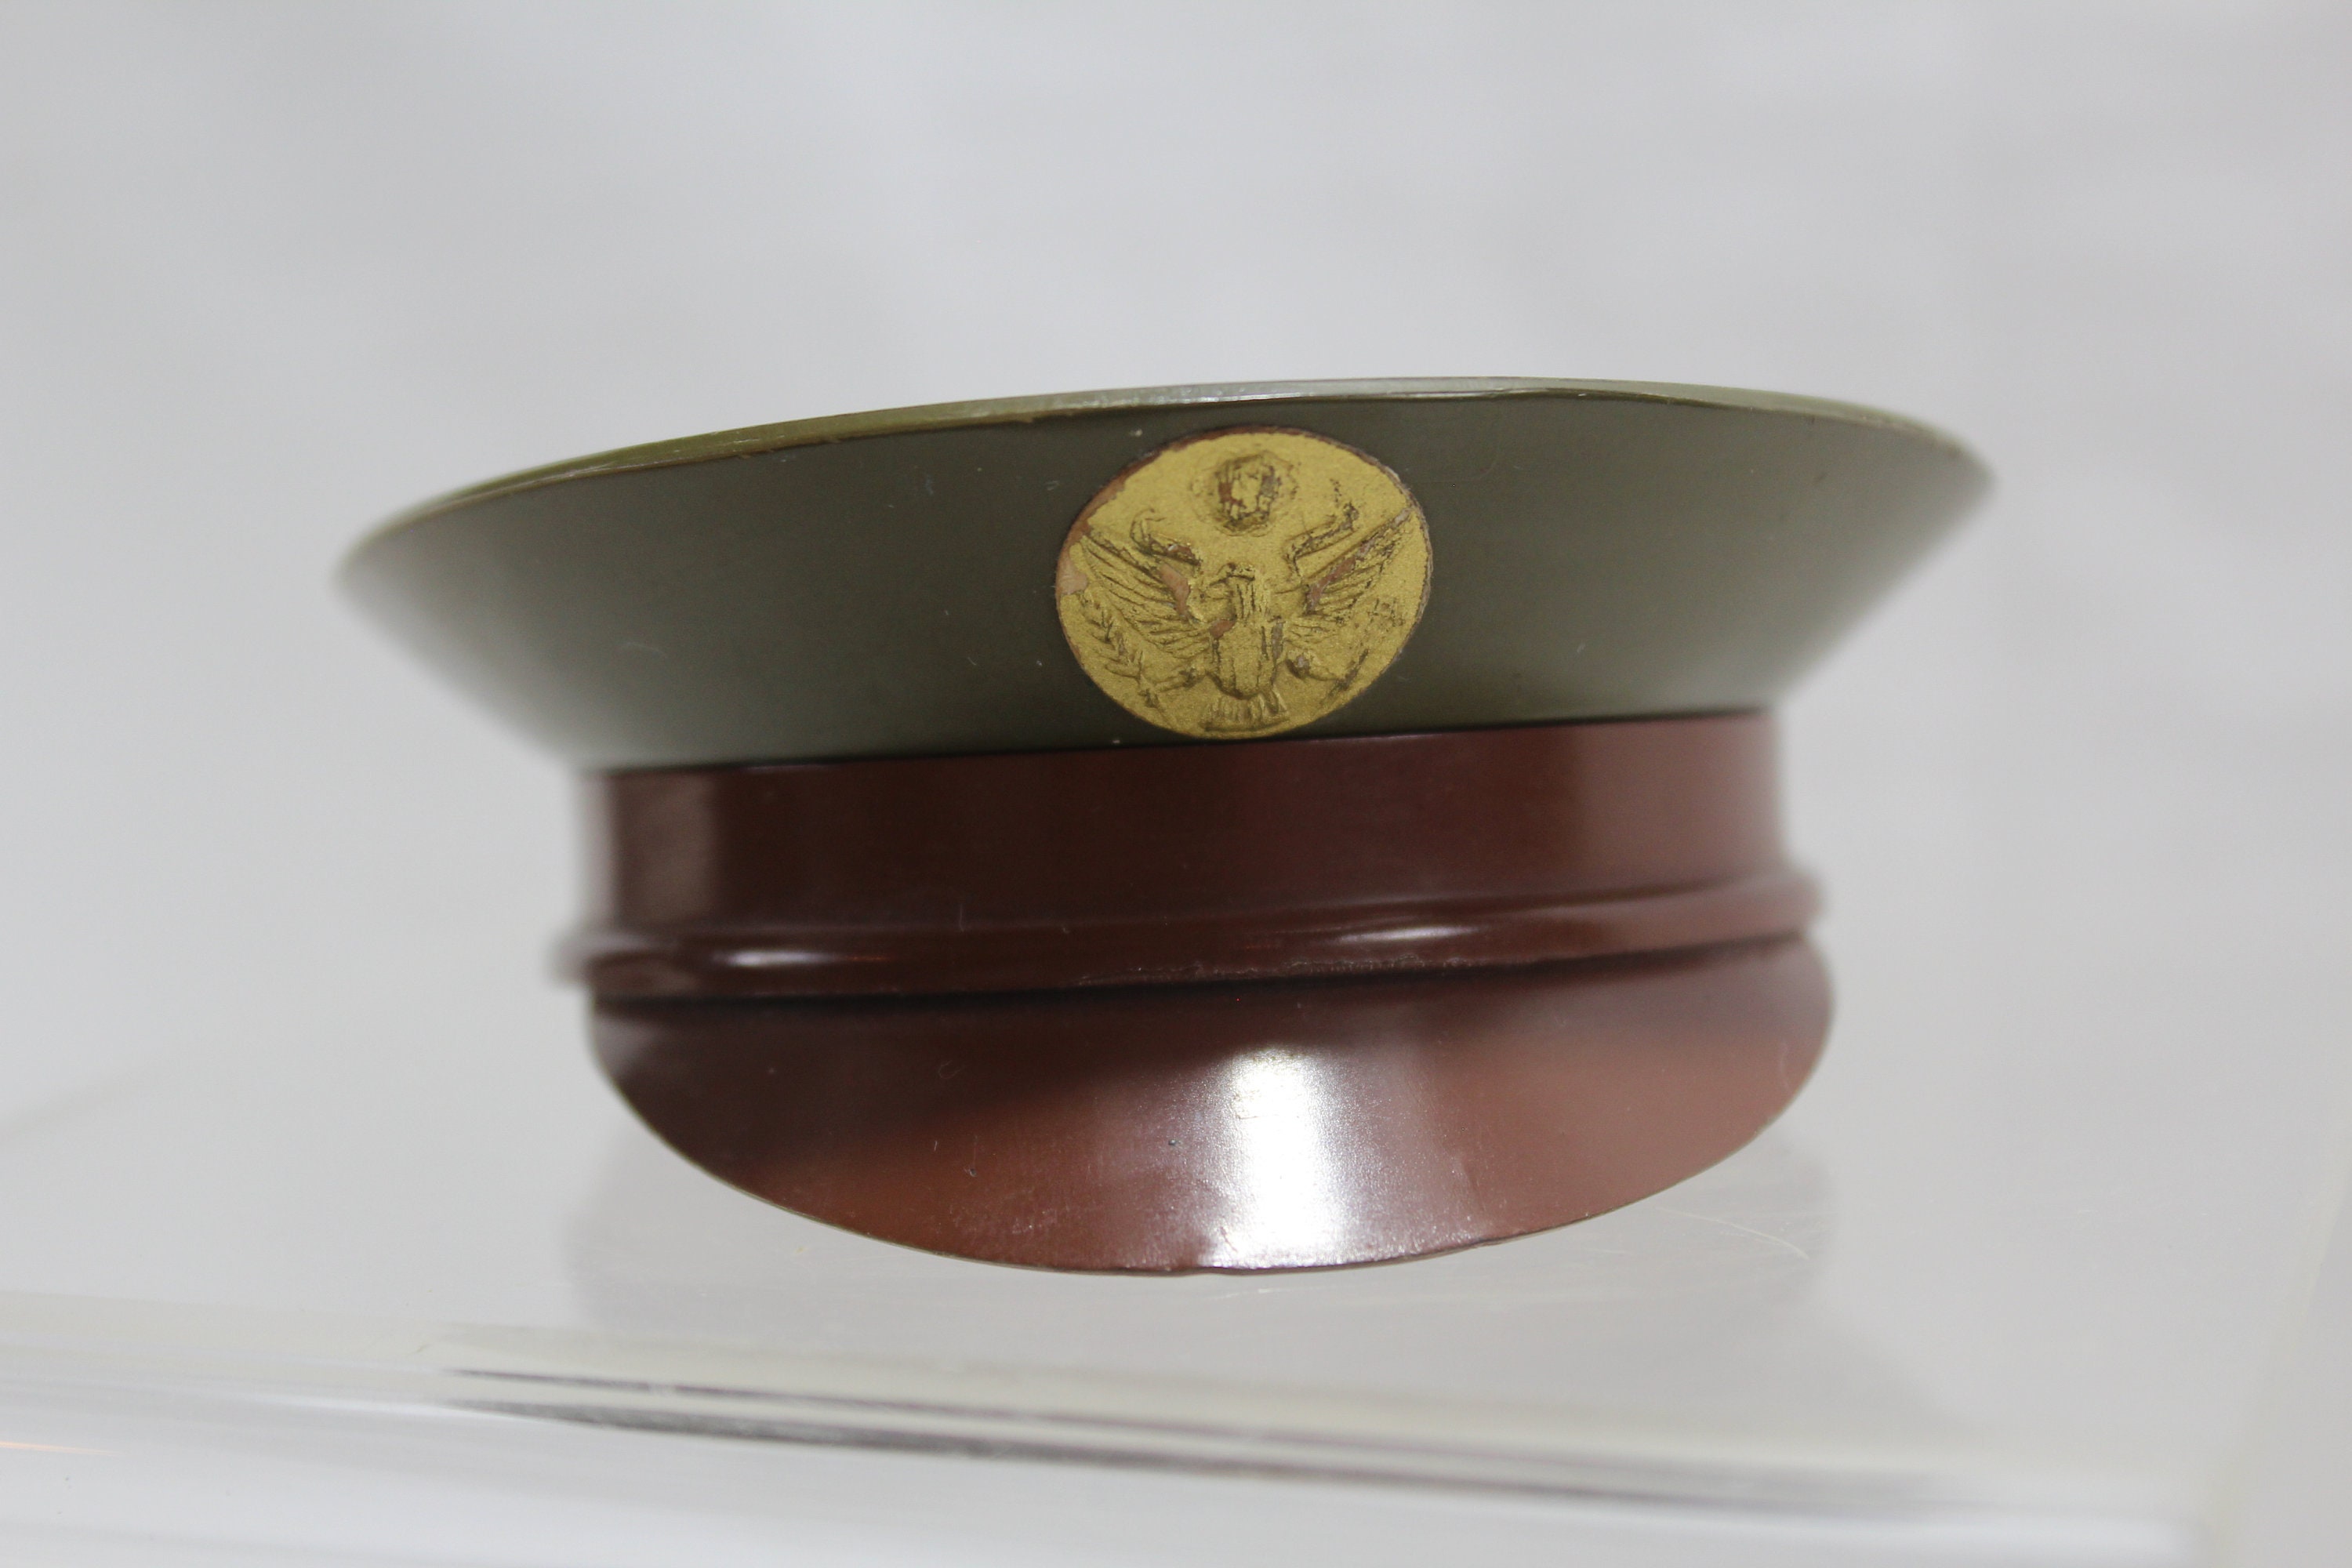 Army Hat Powder Compact, 1940's Sweetheart gift, Henriette Military Cap  compact, Vintage Powder compact, Makeup case - Gift for Collector